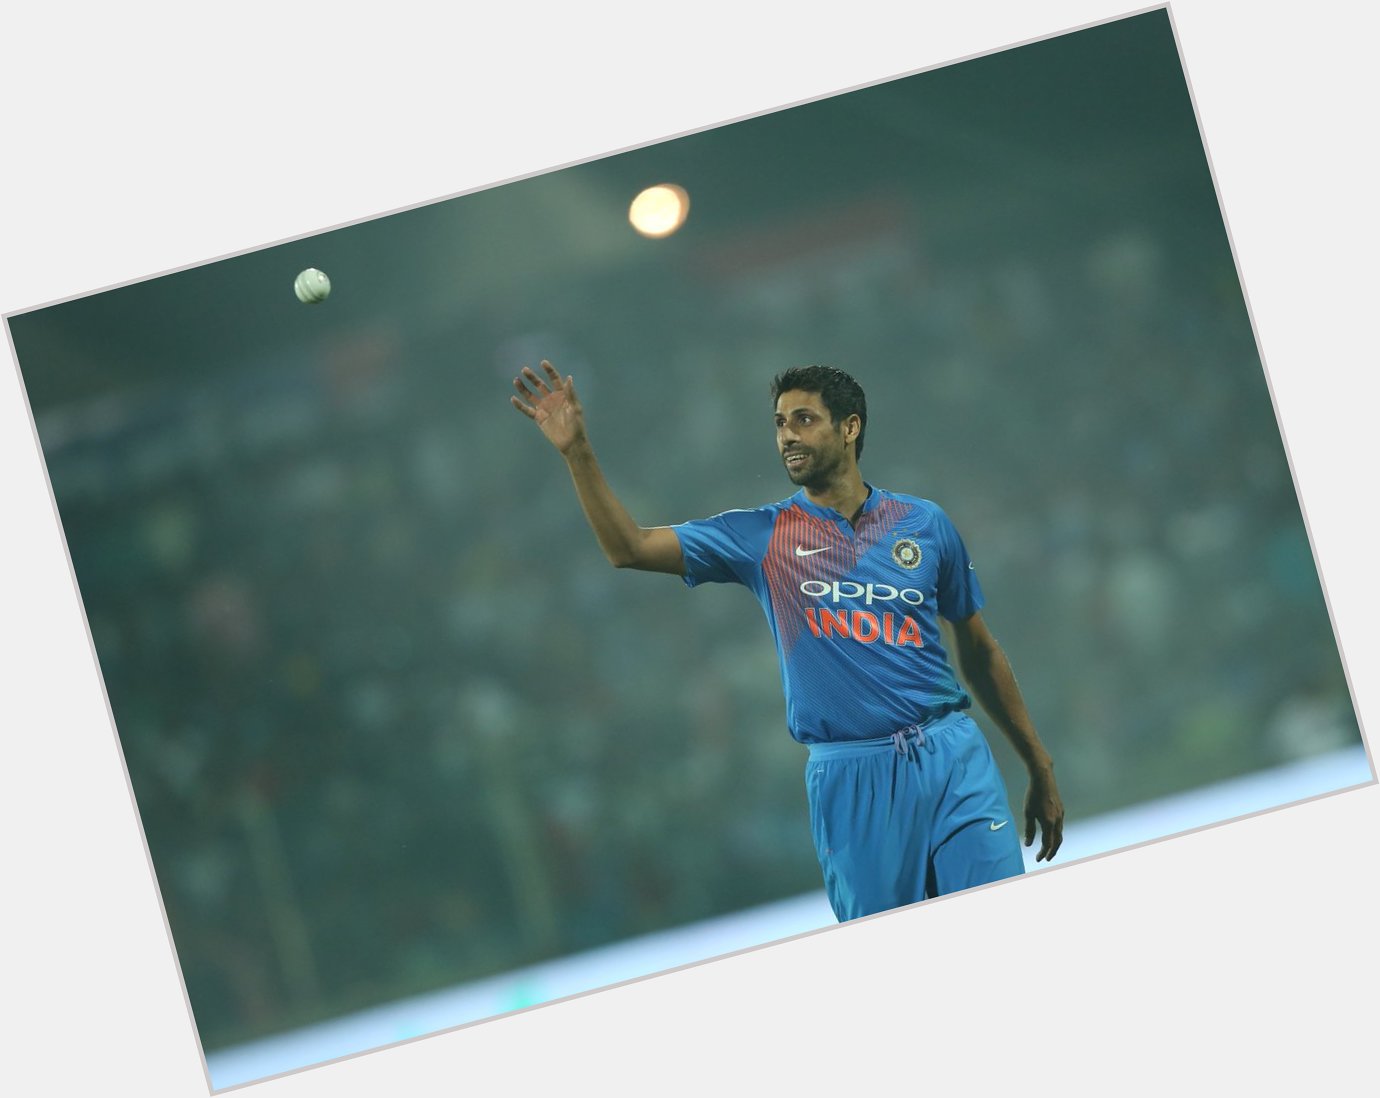 164 matches
235 wickets
A famous 6/23 v England at CWC 2003 

Happy birthday to former India bowler Ashish Nehra!  